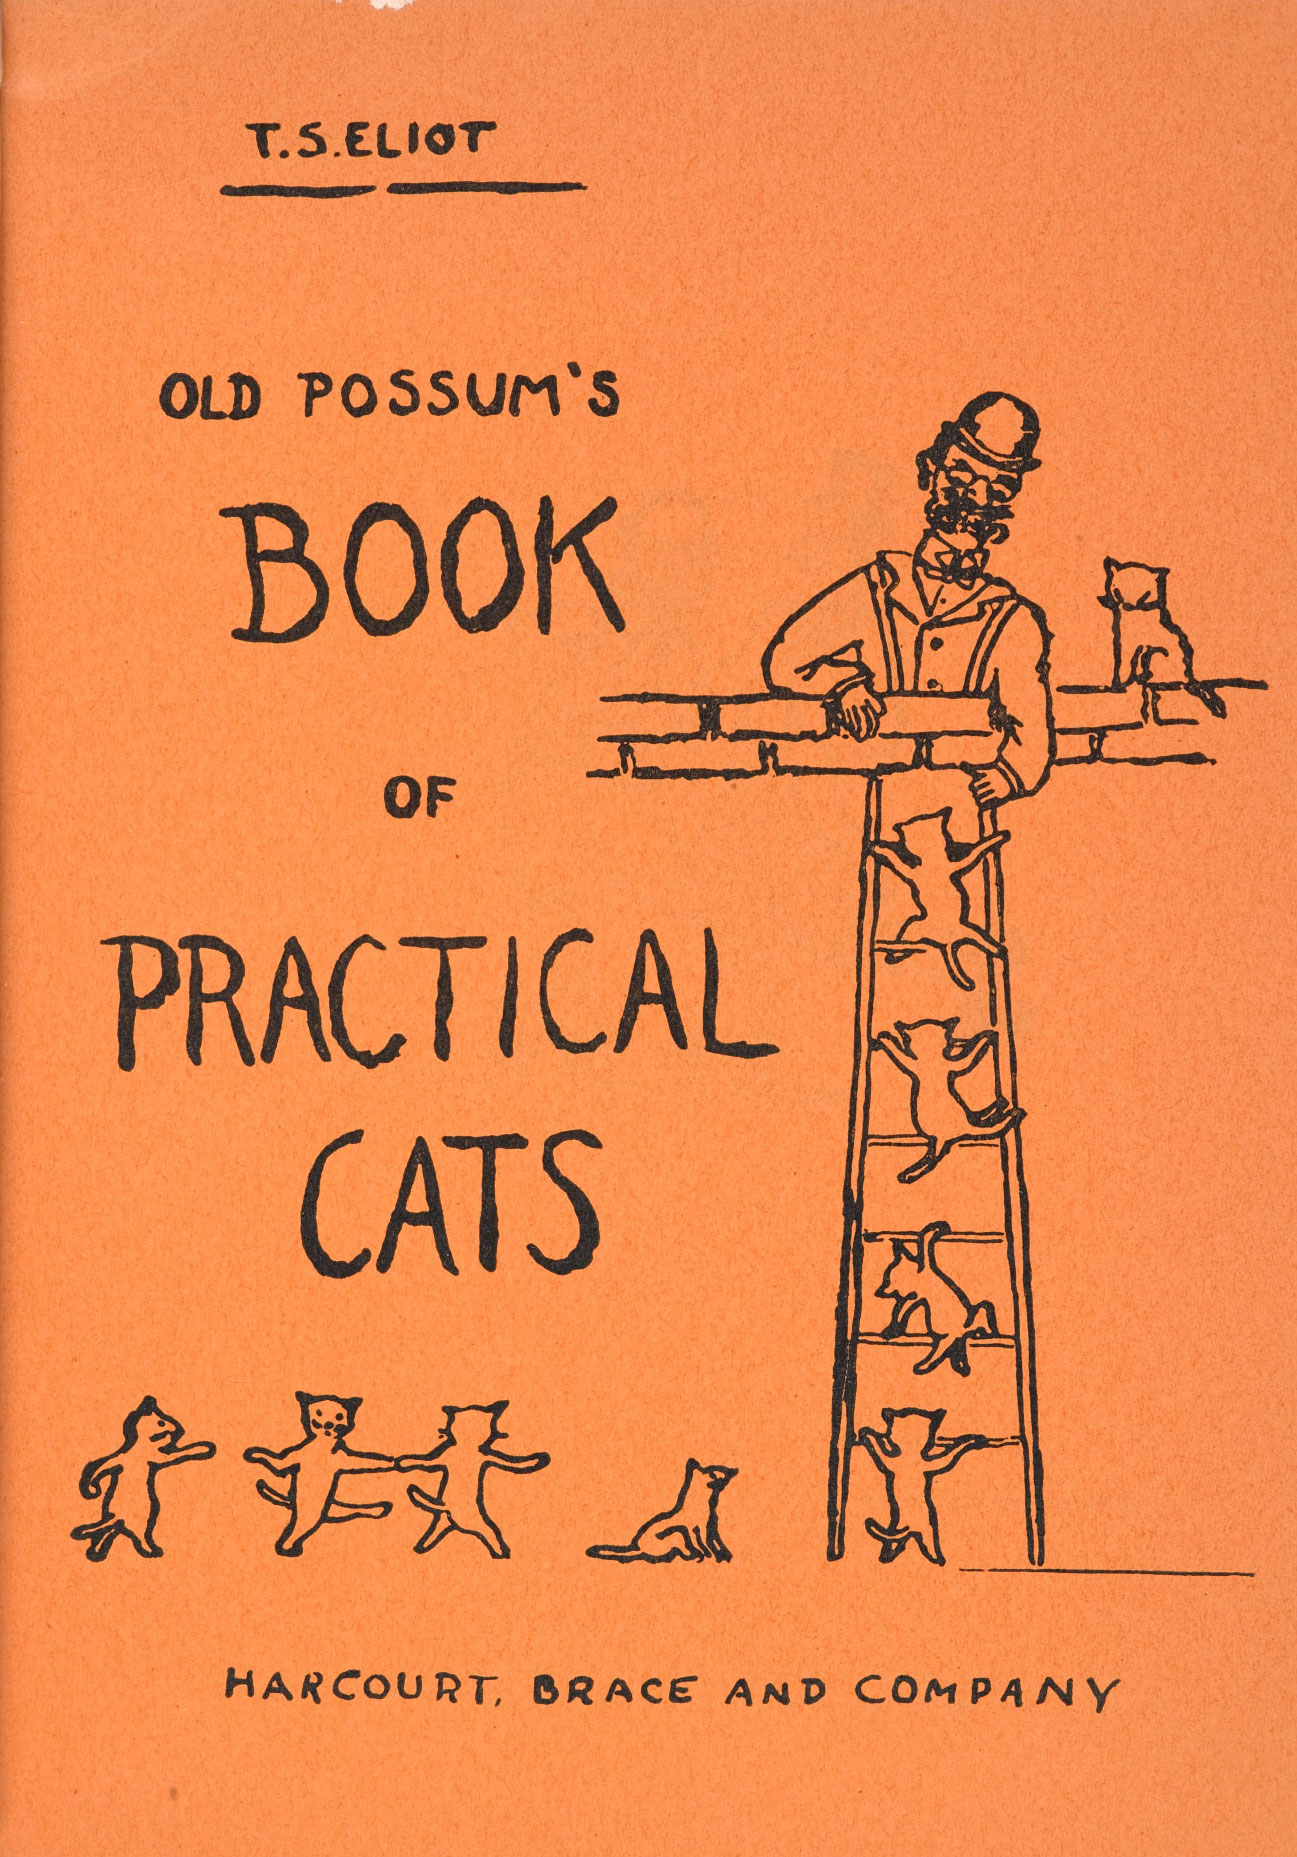 Old Possum's Book Of Practical Cats by T. S. Eliot 